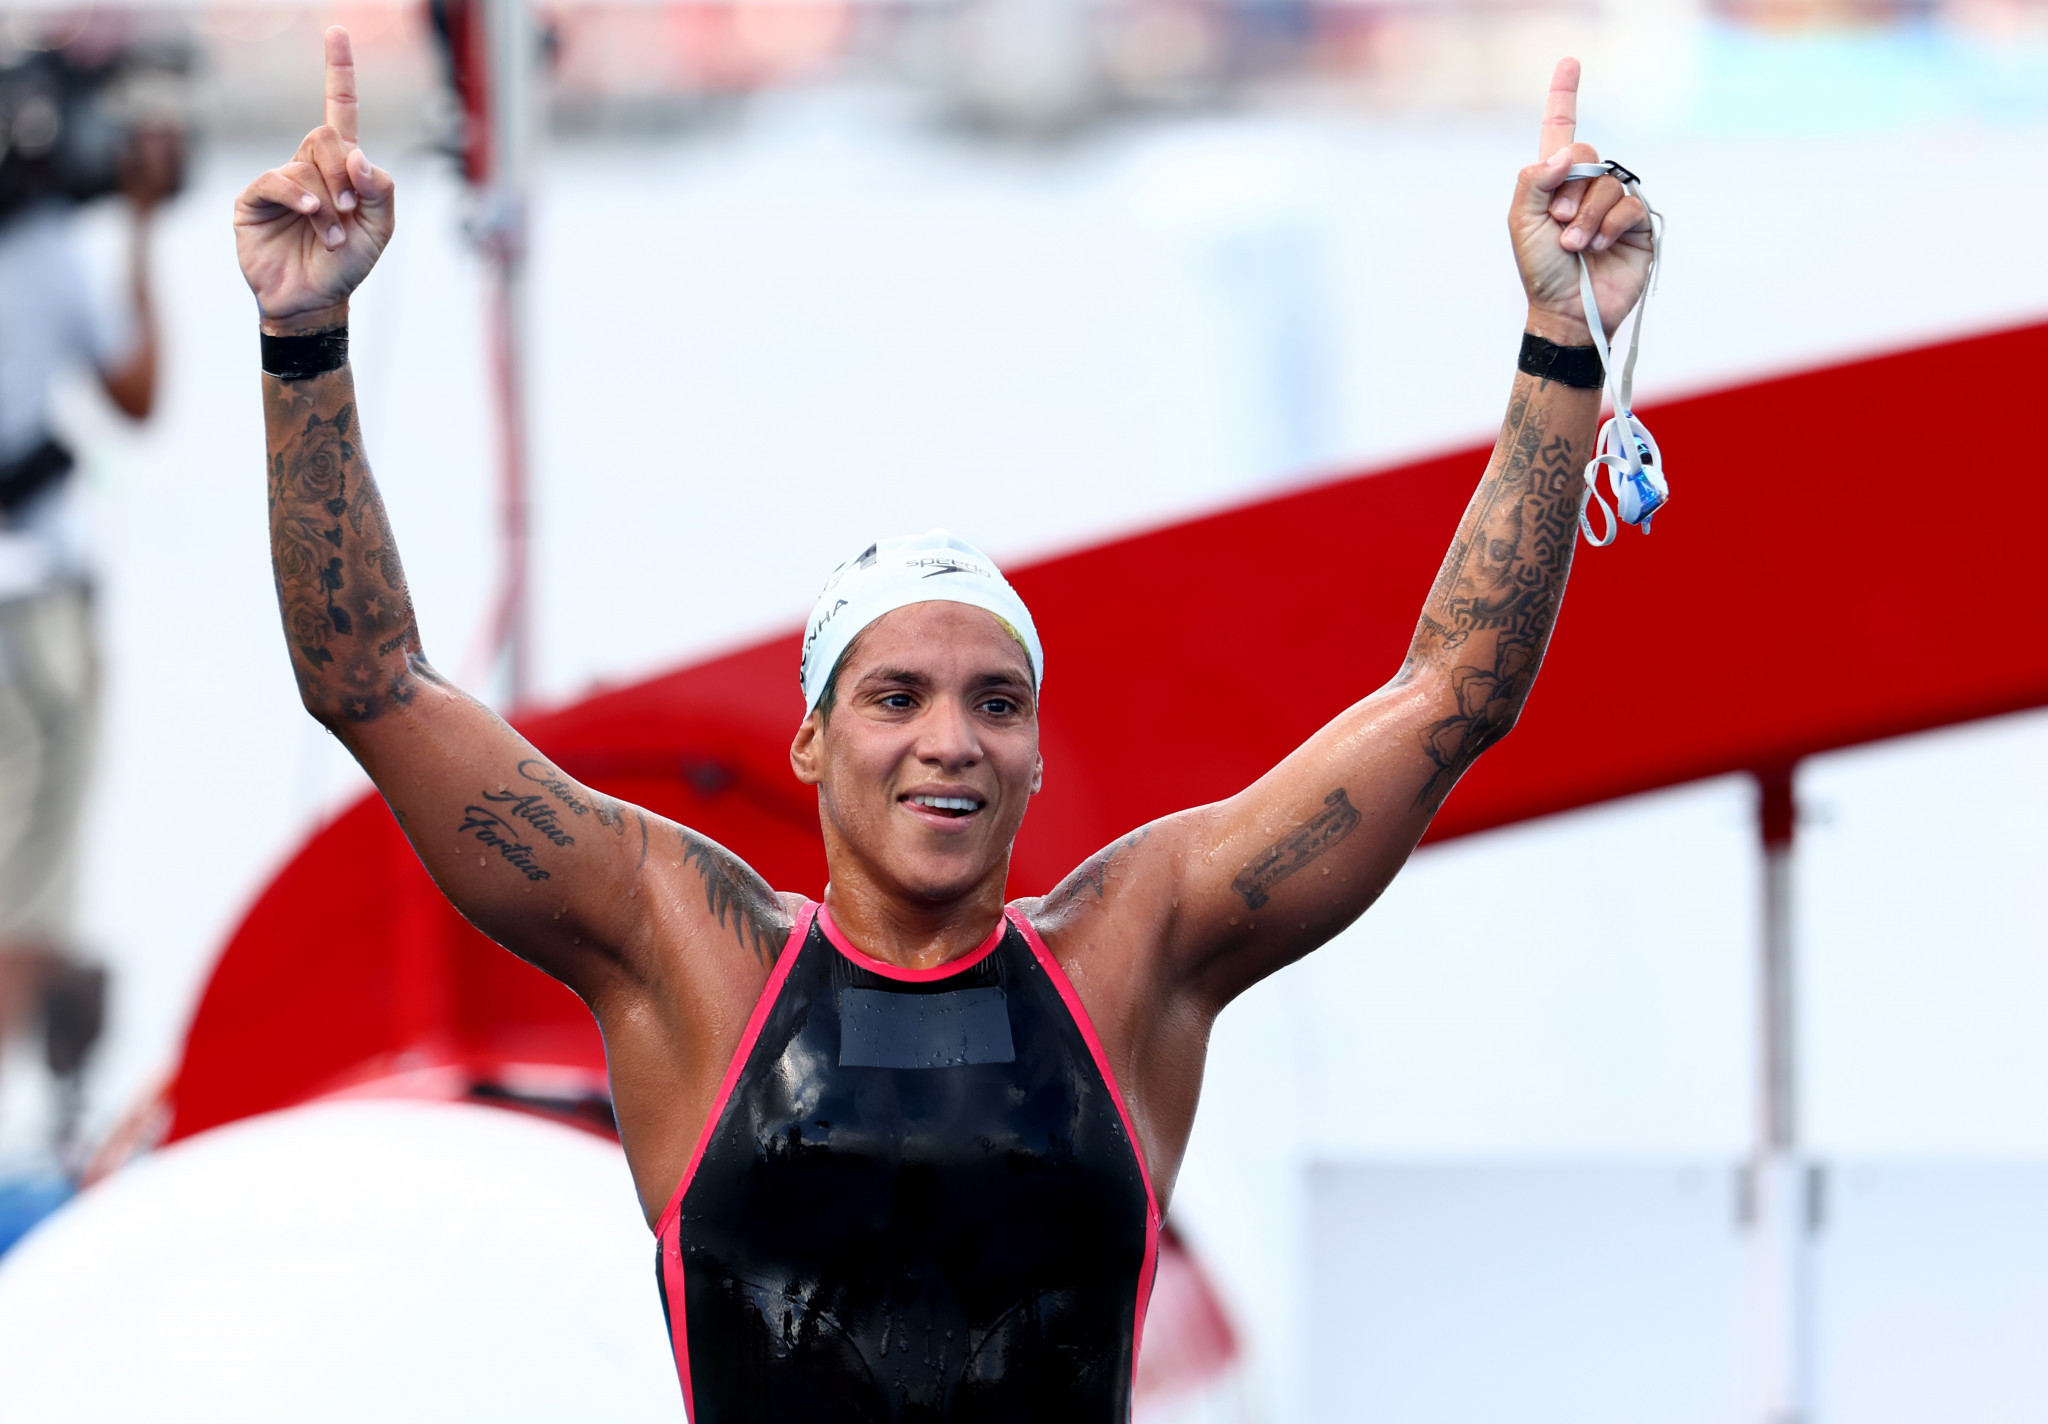 Open water swimming star Ana Marcela Cunha is also one of the athletes seeking election ©Getty Images